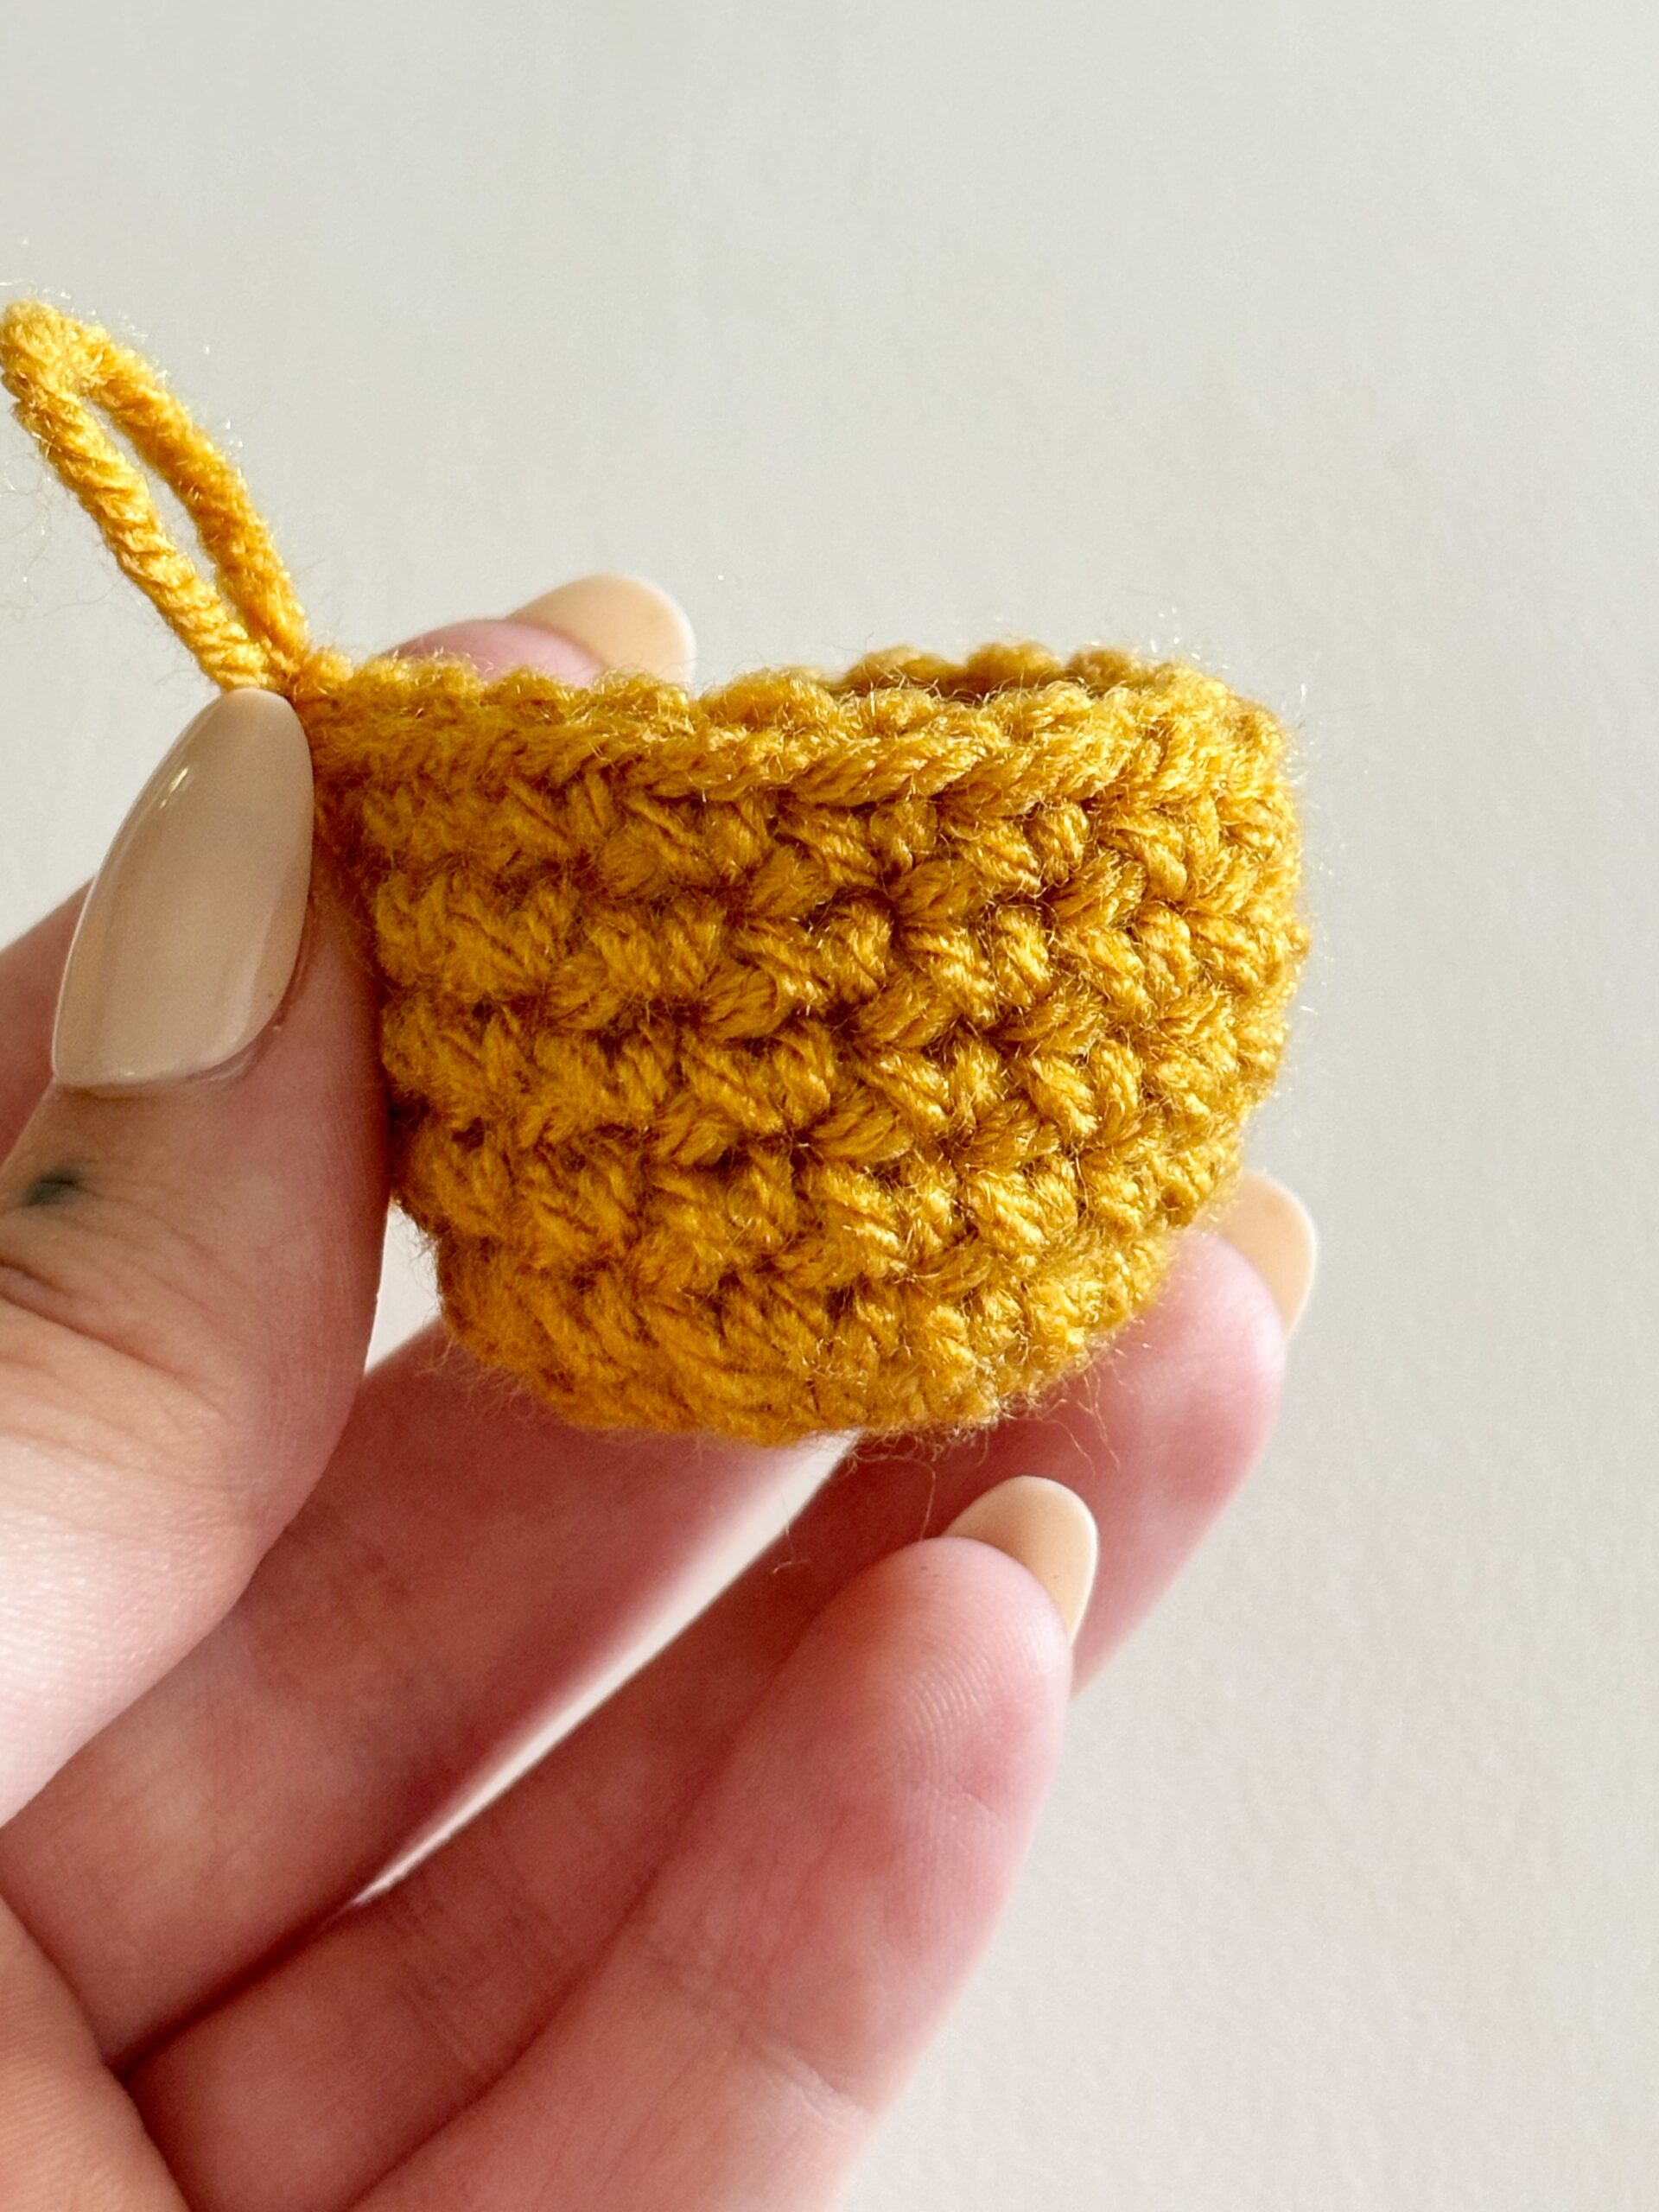 What is the right side of crochet amigurumi get to know your stitches